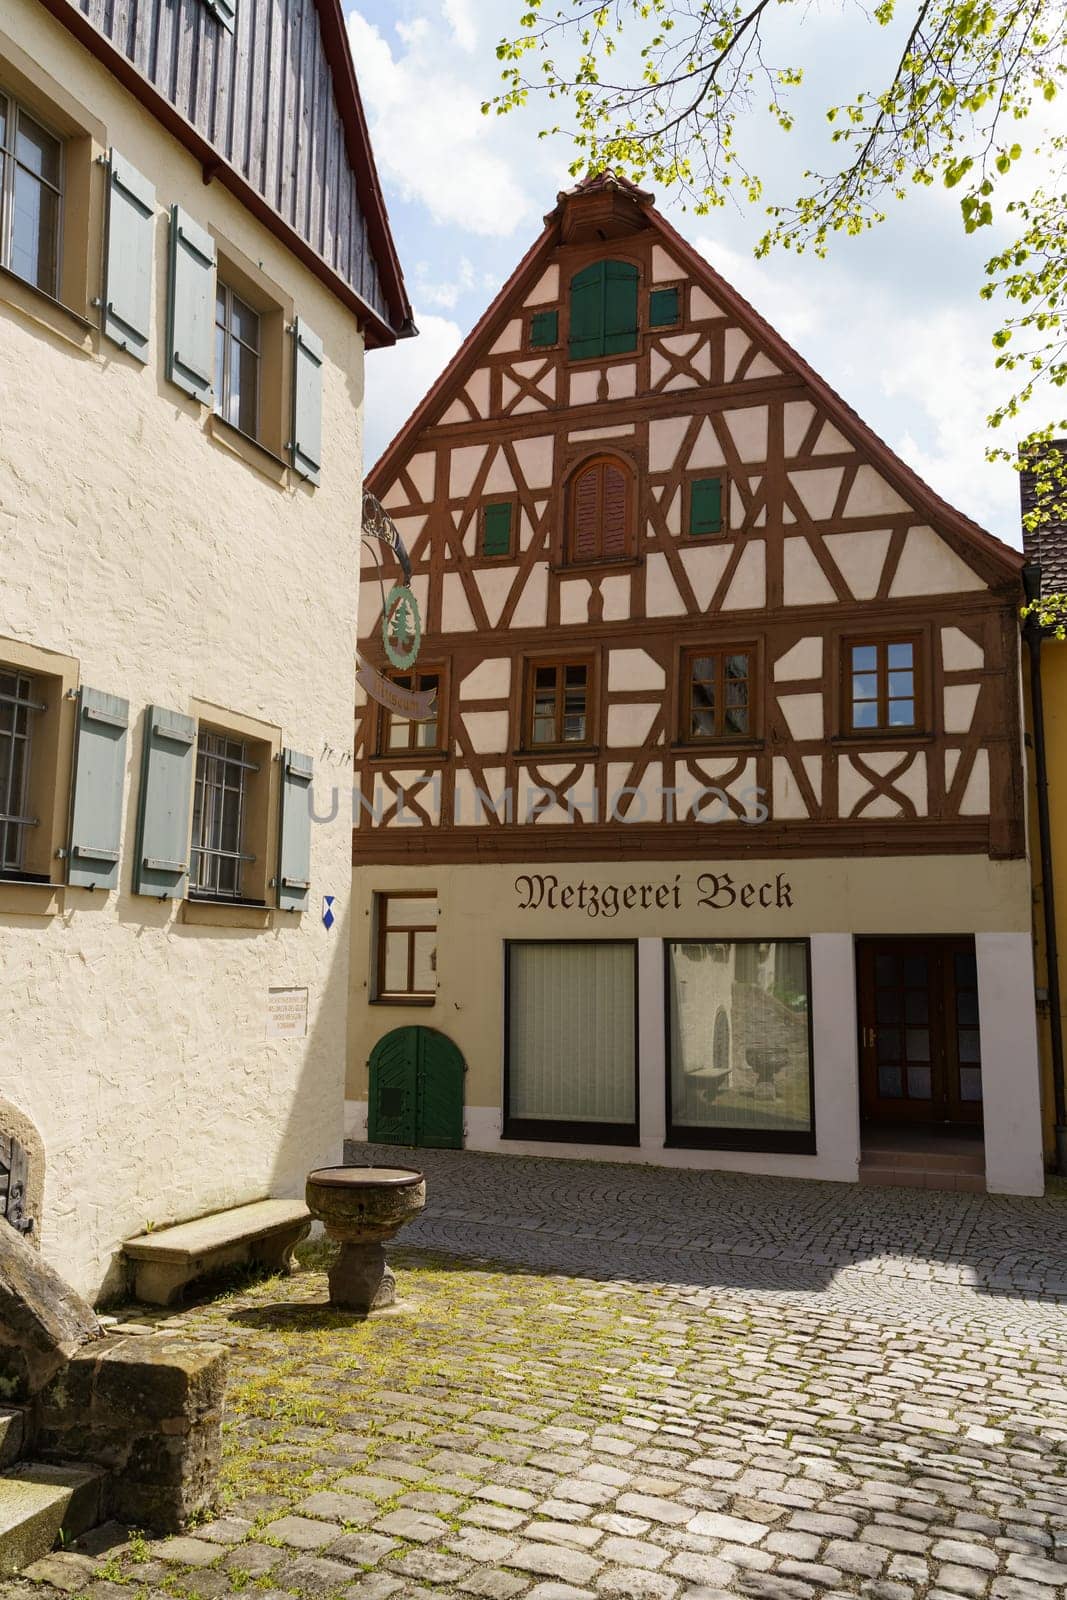 Feuchtwangen, Germany - June 6, 2023: A traditional butcher shop with a sign that reads Metzgerei Beck is located in a charming cobblestone alleyway in Germany. The buildings timber framing and decorative details are a beautiful example of the regions architectural style.